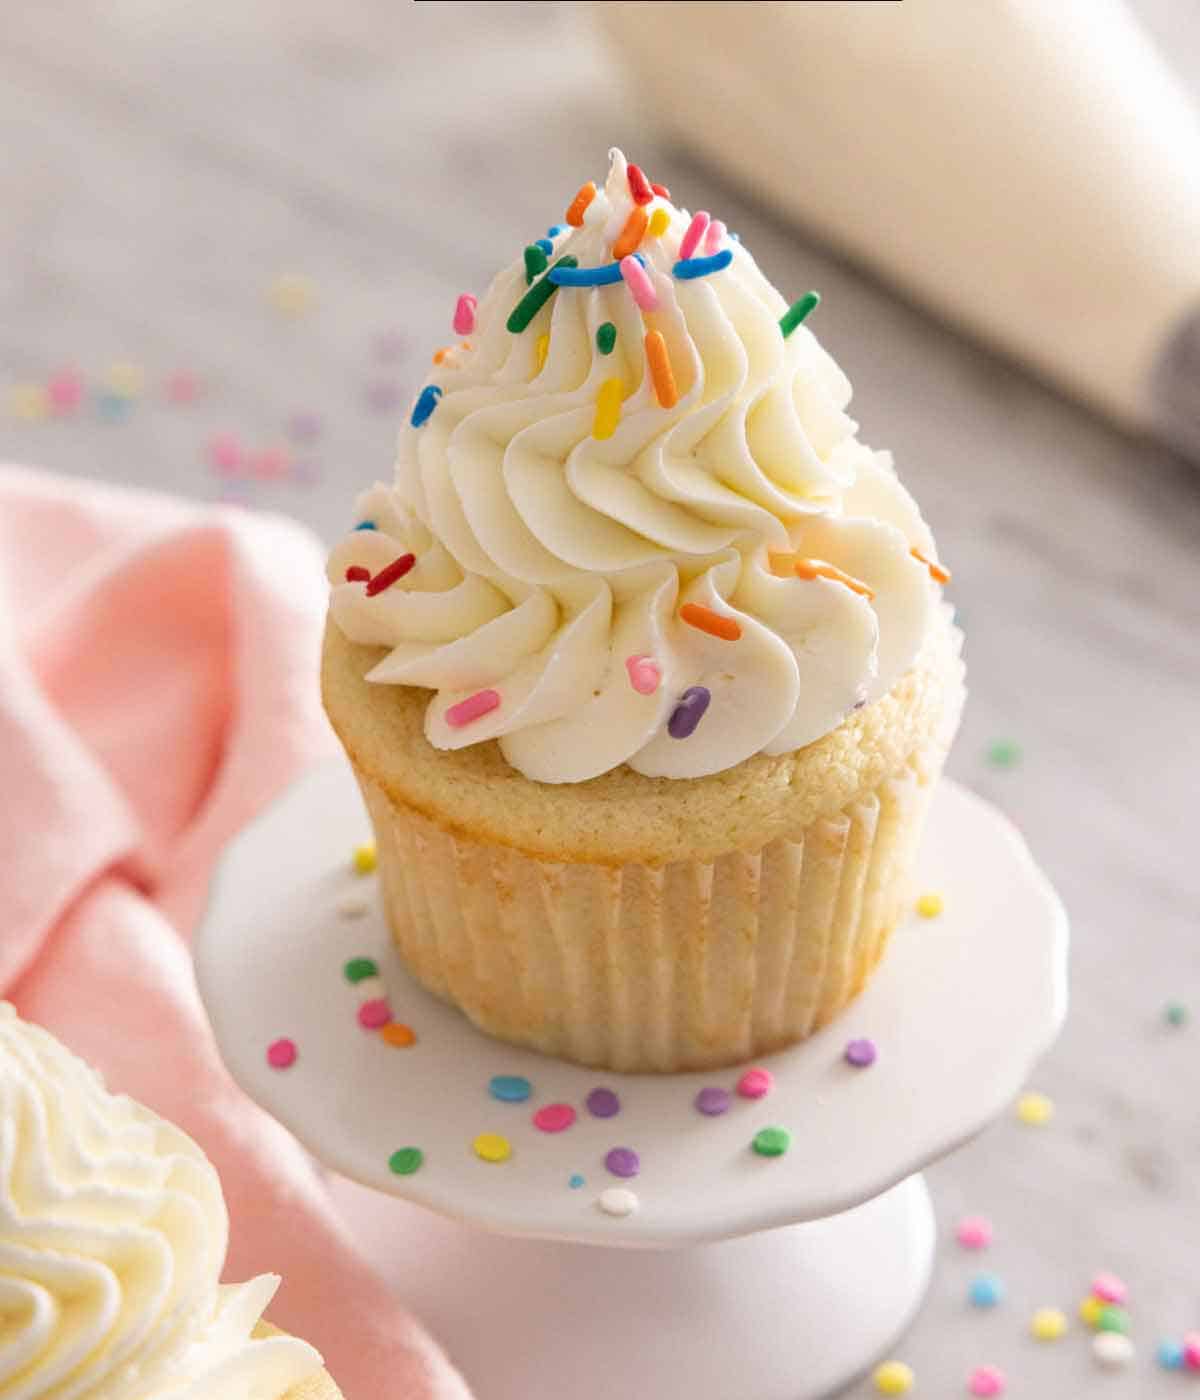 A vanilla cupcake with Italian buttercream piped on top with sprinkles.